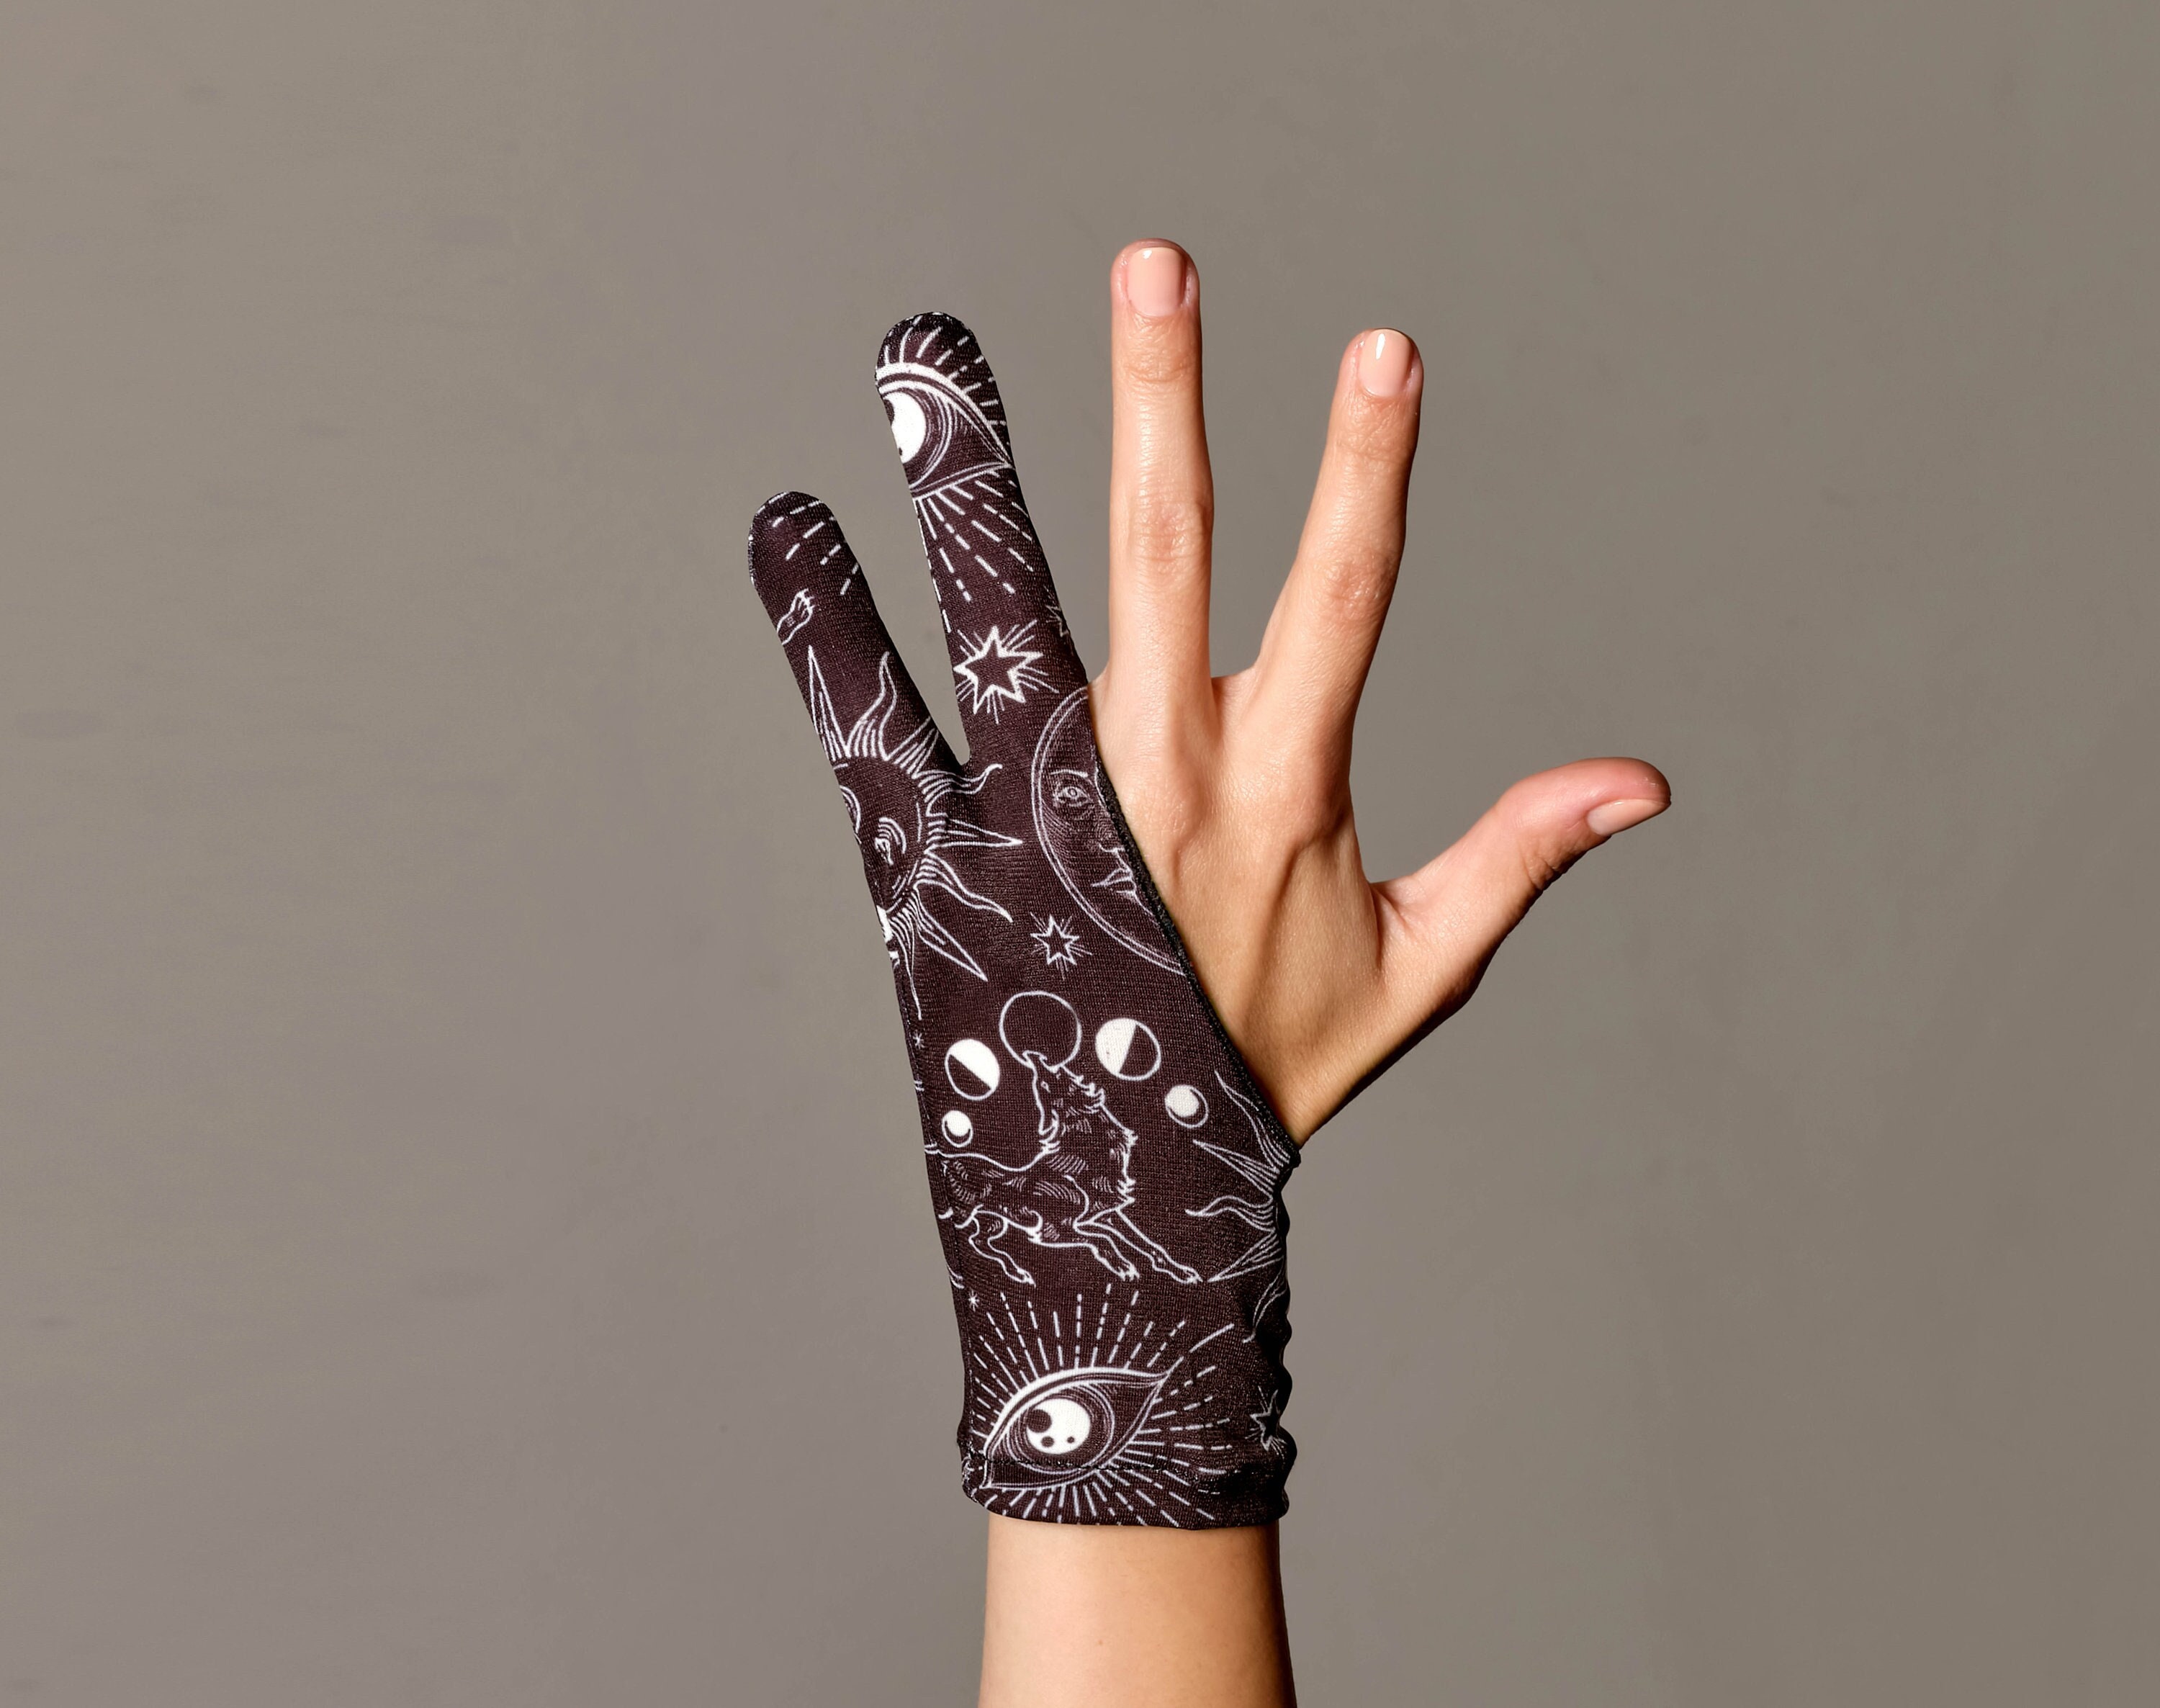 2 Fingers Drawing Glove Anti-fouling Artist Favor for Graphics